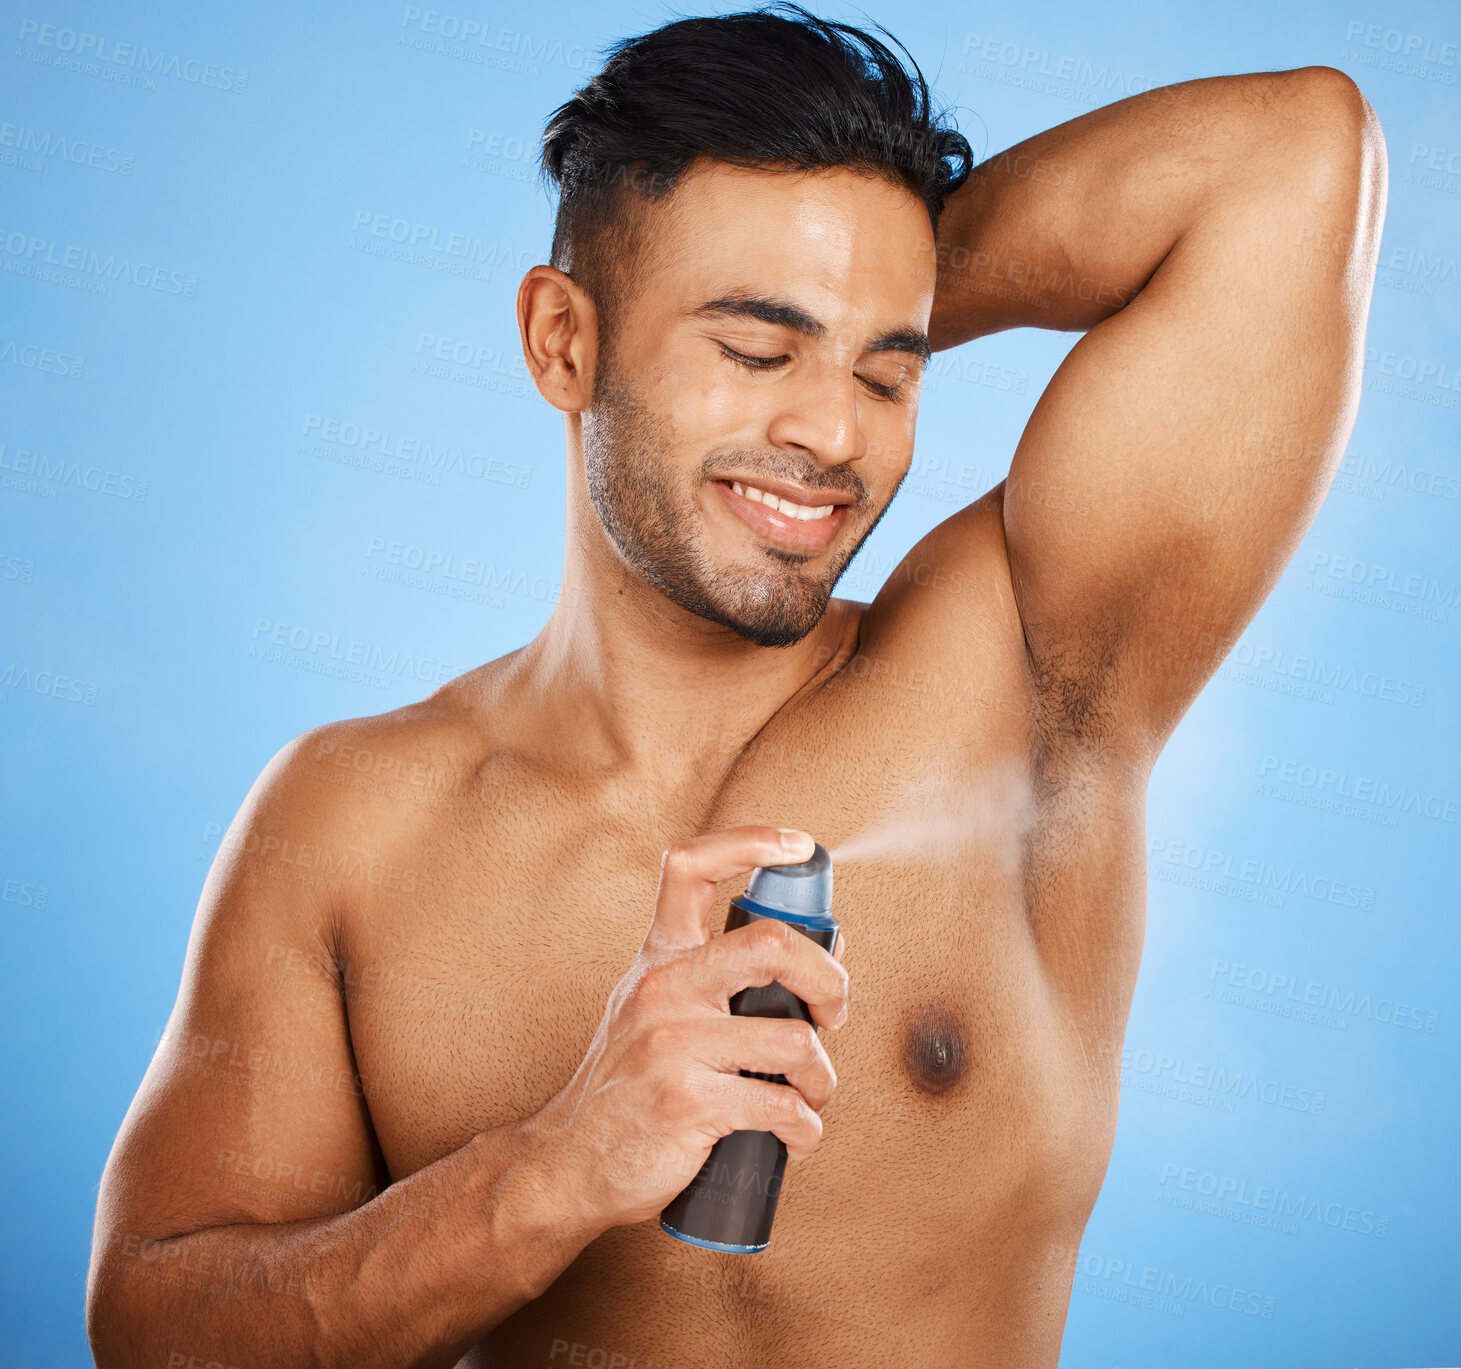 Buy stock photo Deodorant, beauty and grooming with a man model using antiperspirant in studio on a blue background. Body spray, aerosol and smell with a handsome young male spraying a scent product to his underarm